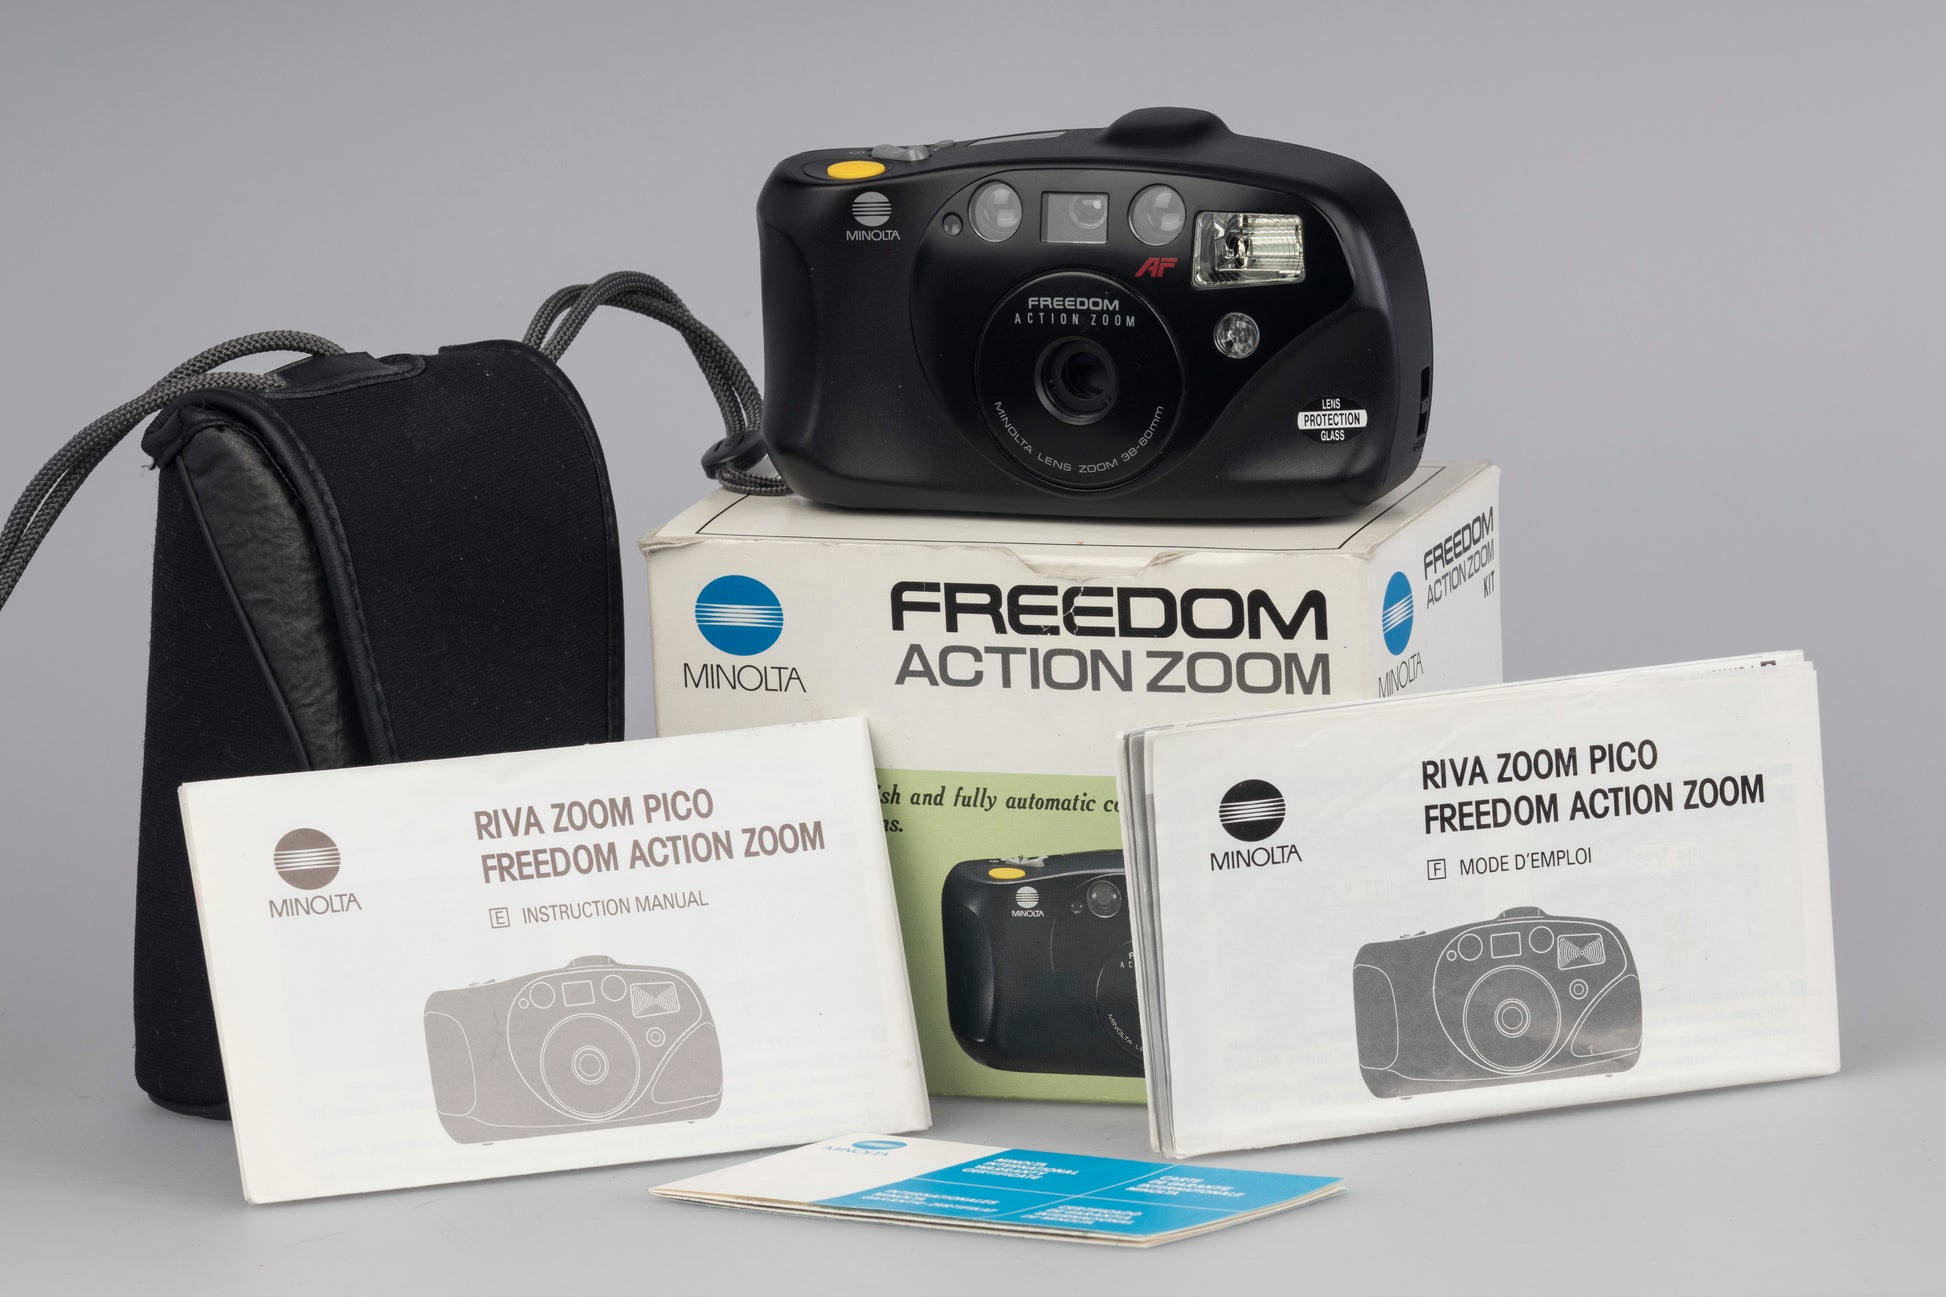 Minolta Freedom Action Zoom 35mm film camera. Shown with box and manual